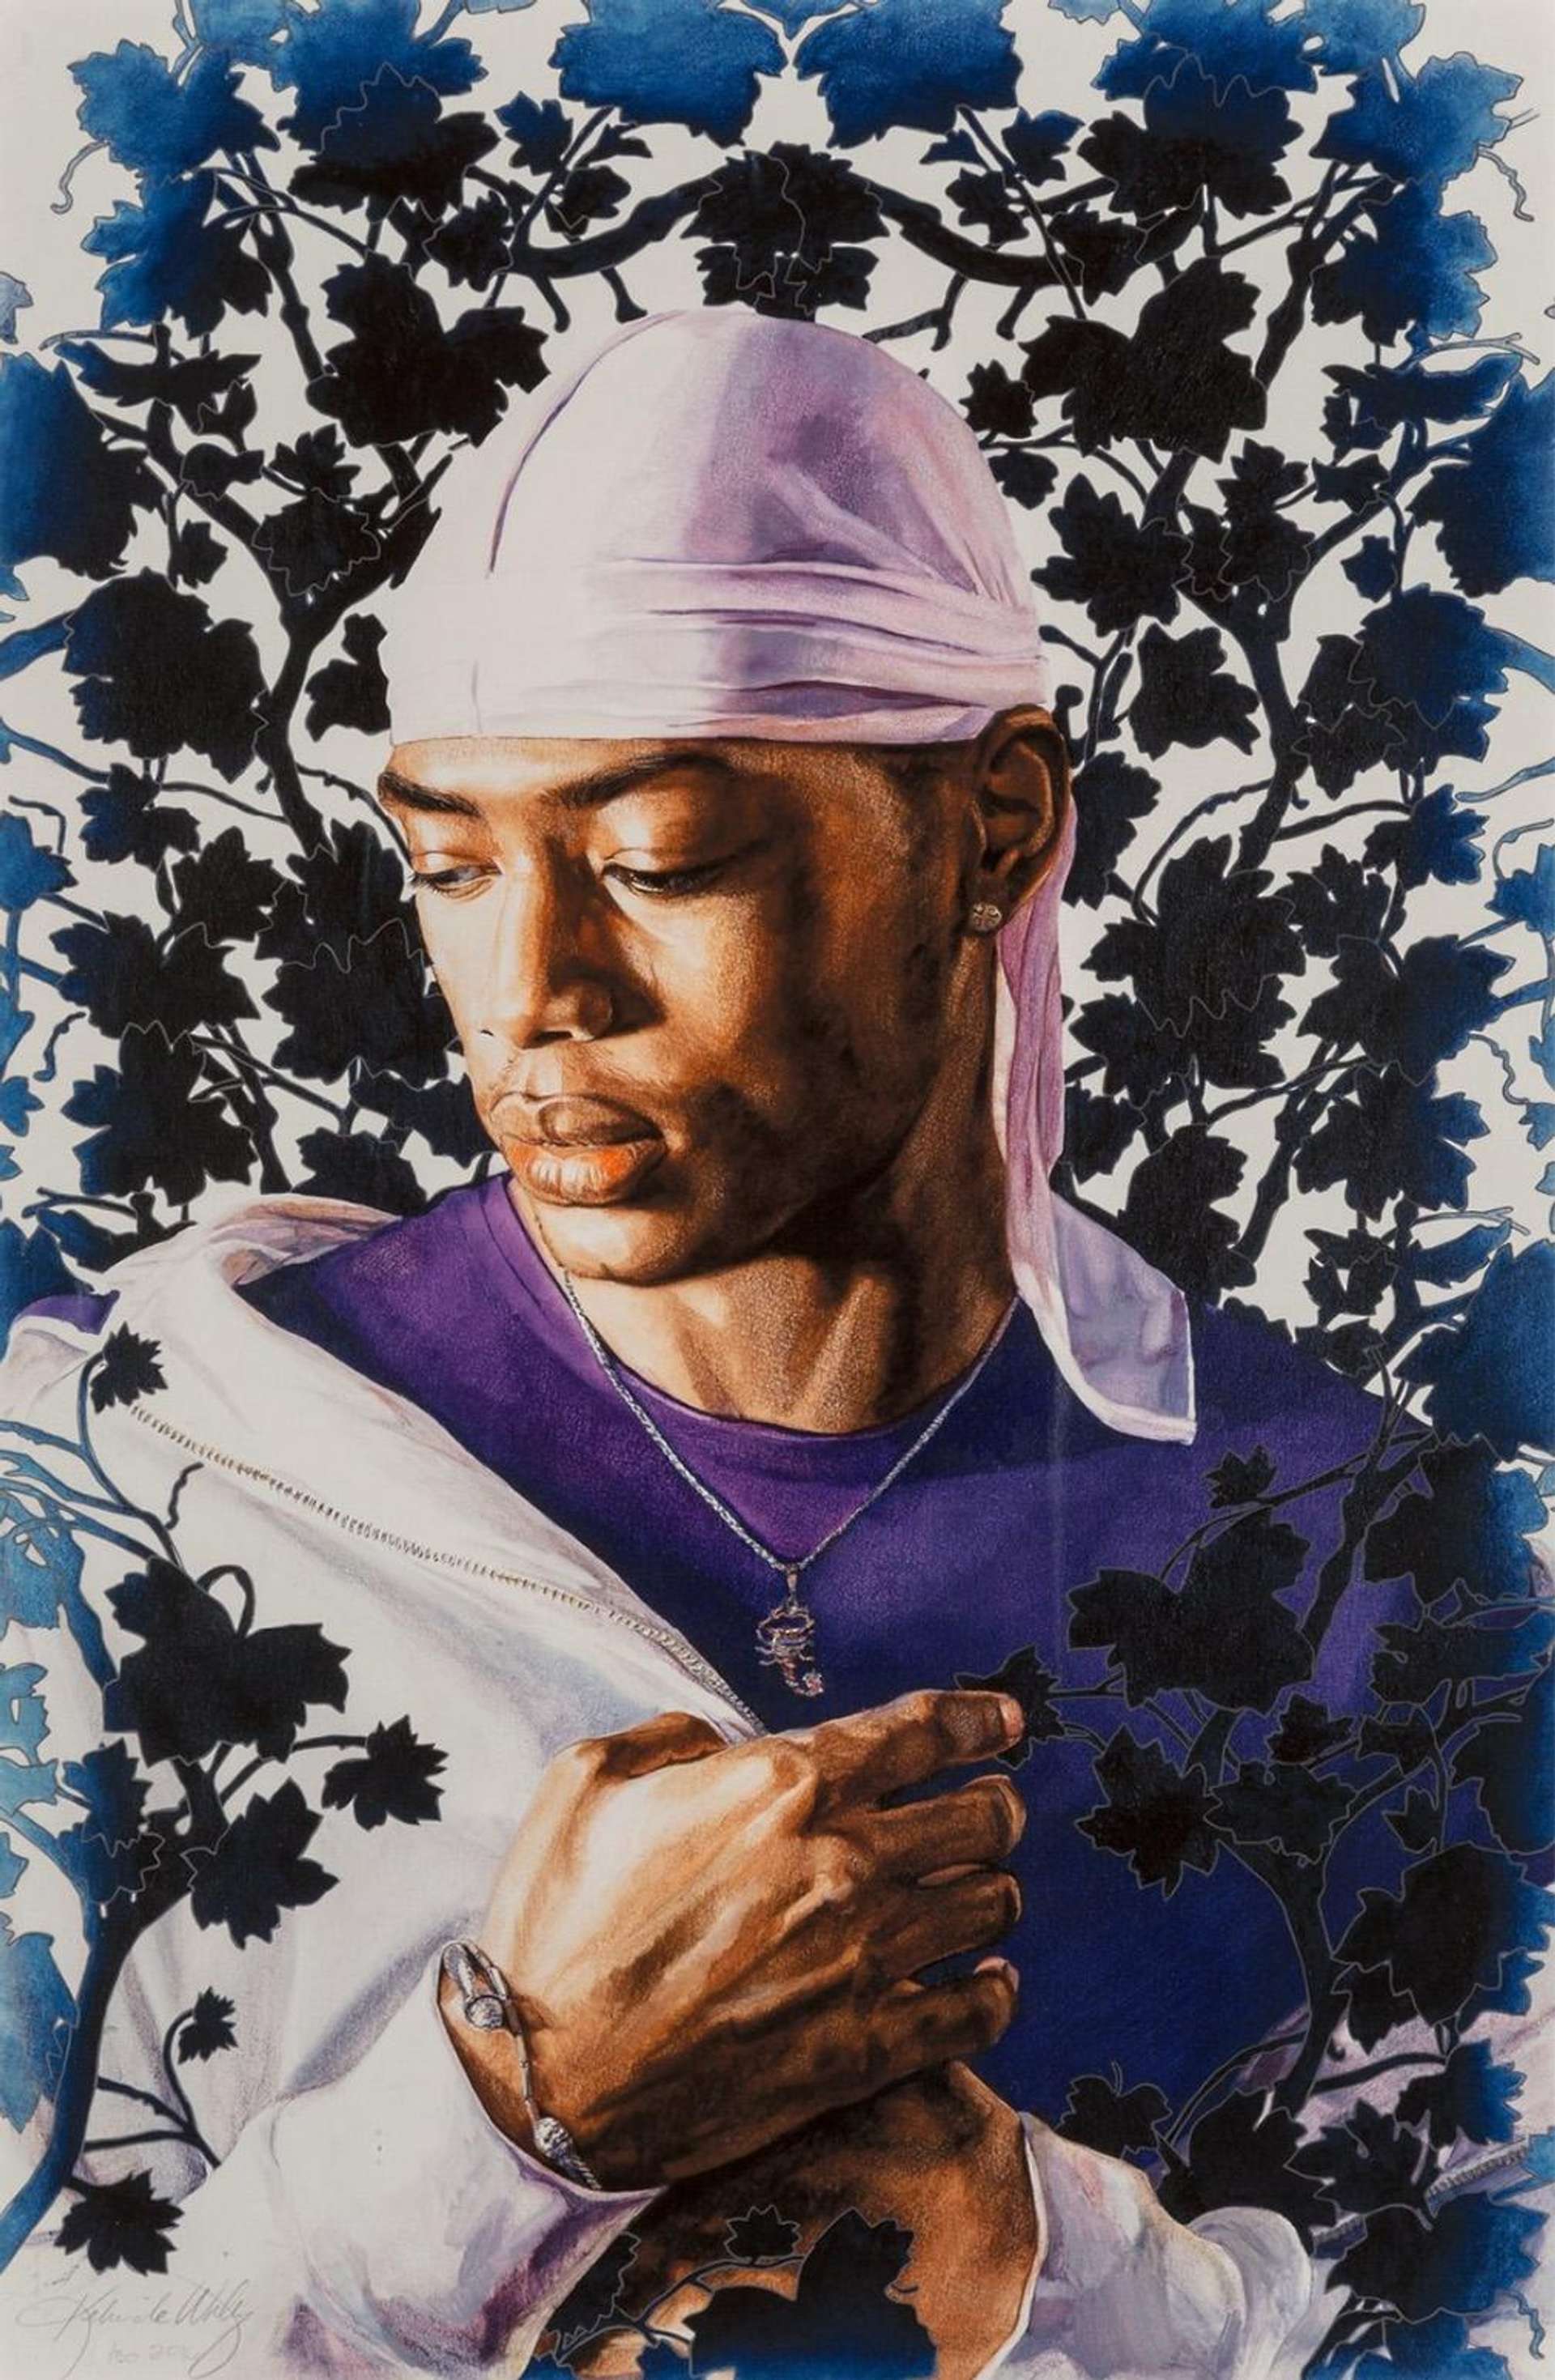 Kehinde Wiley’s Tomb Of Pope Alexander VII Study I. A pigment print of a male dressed in a purple shirt, jacket, and durag surrounded by French Rococo foliage